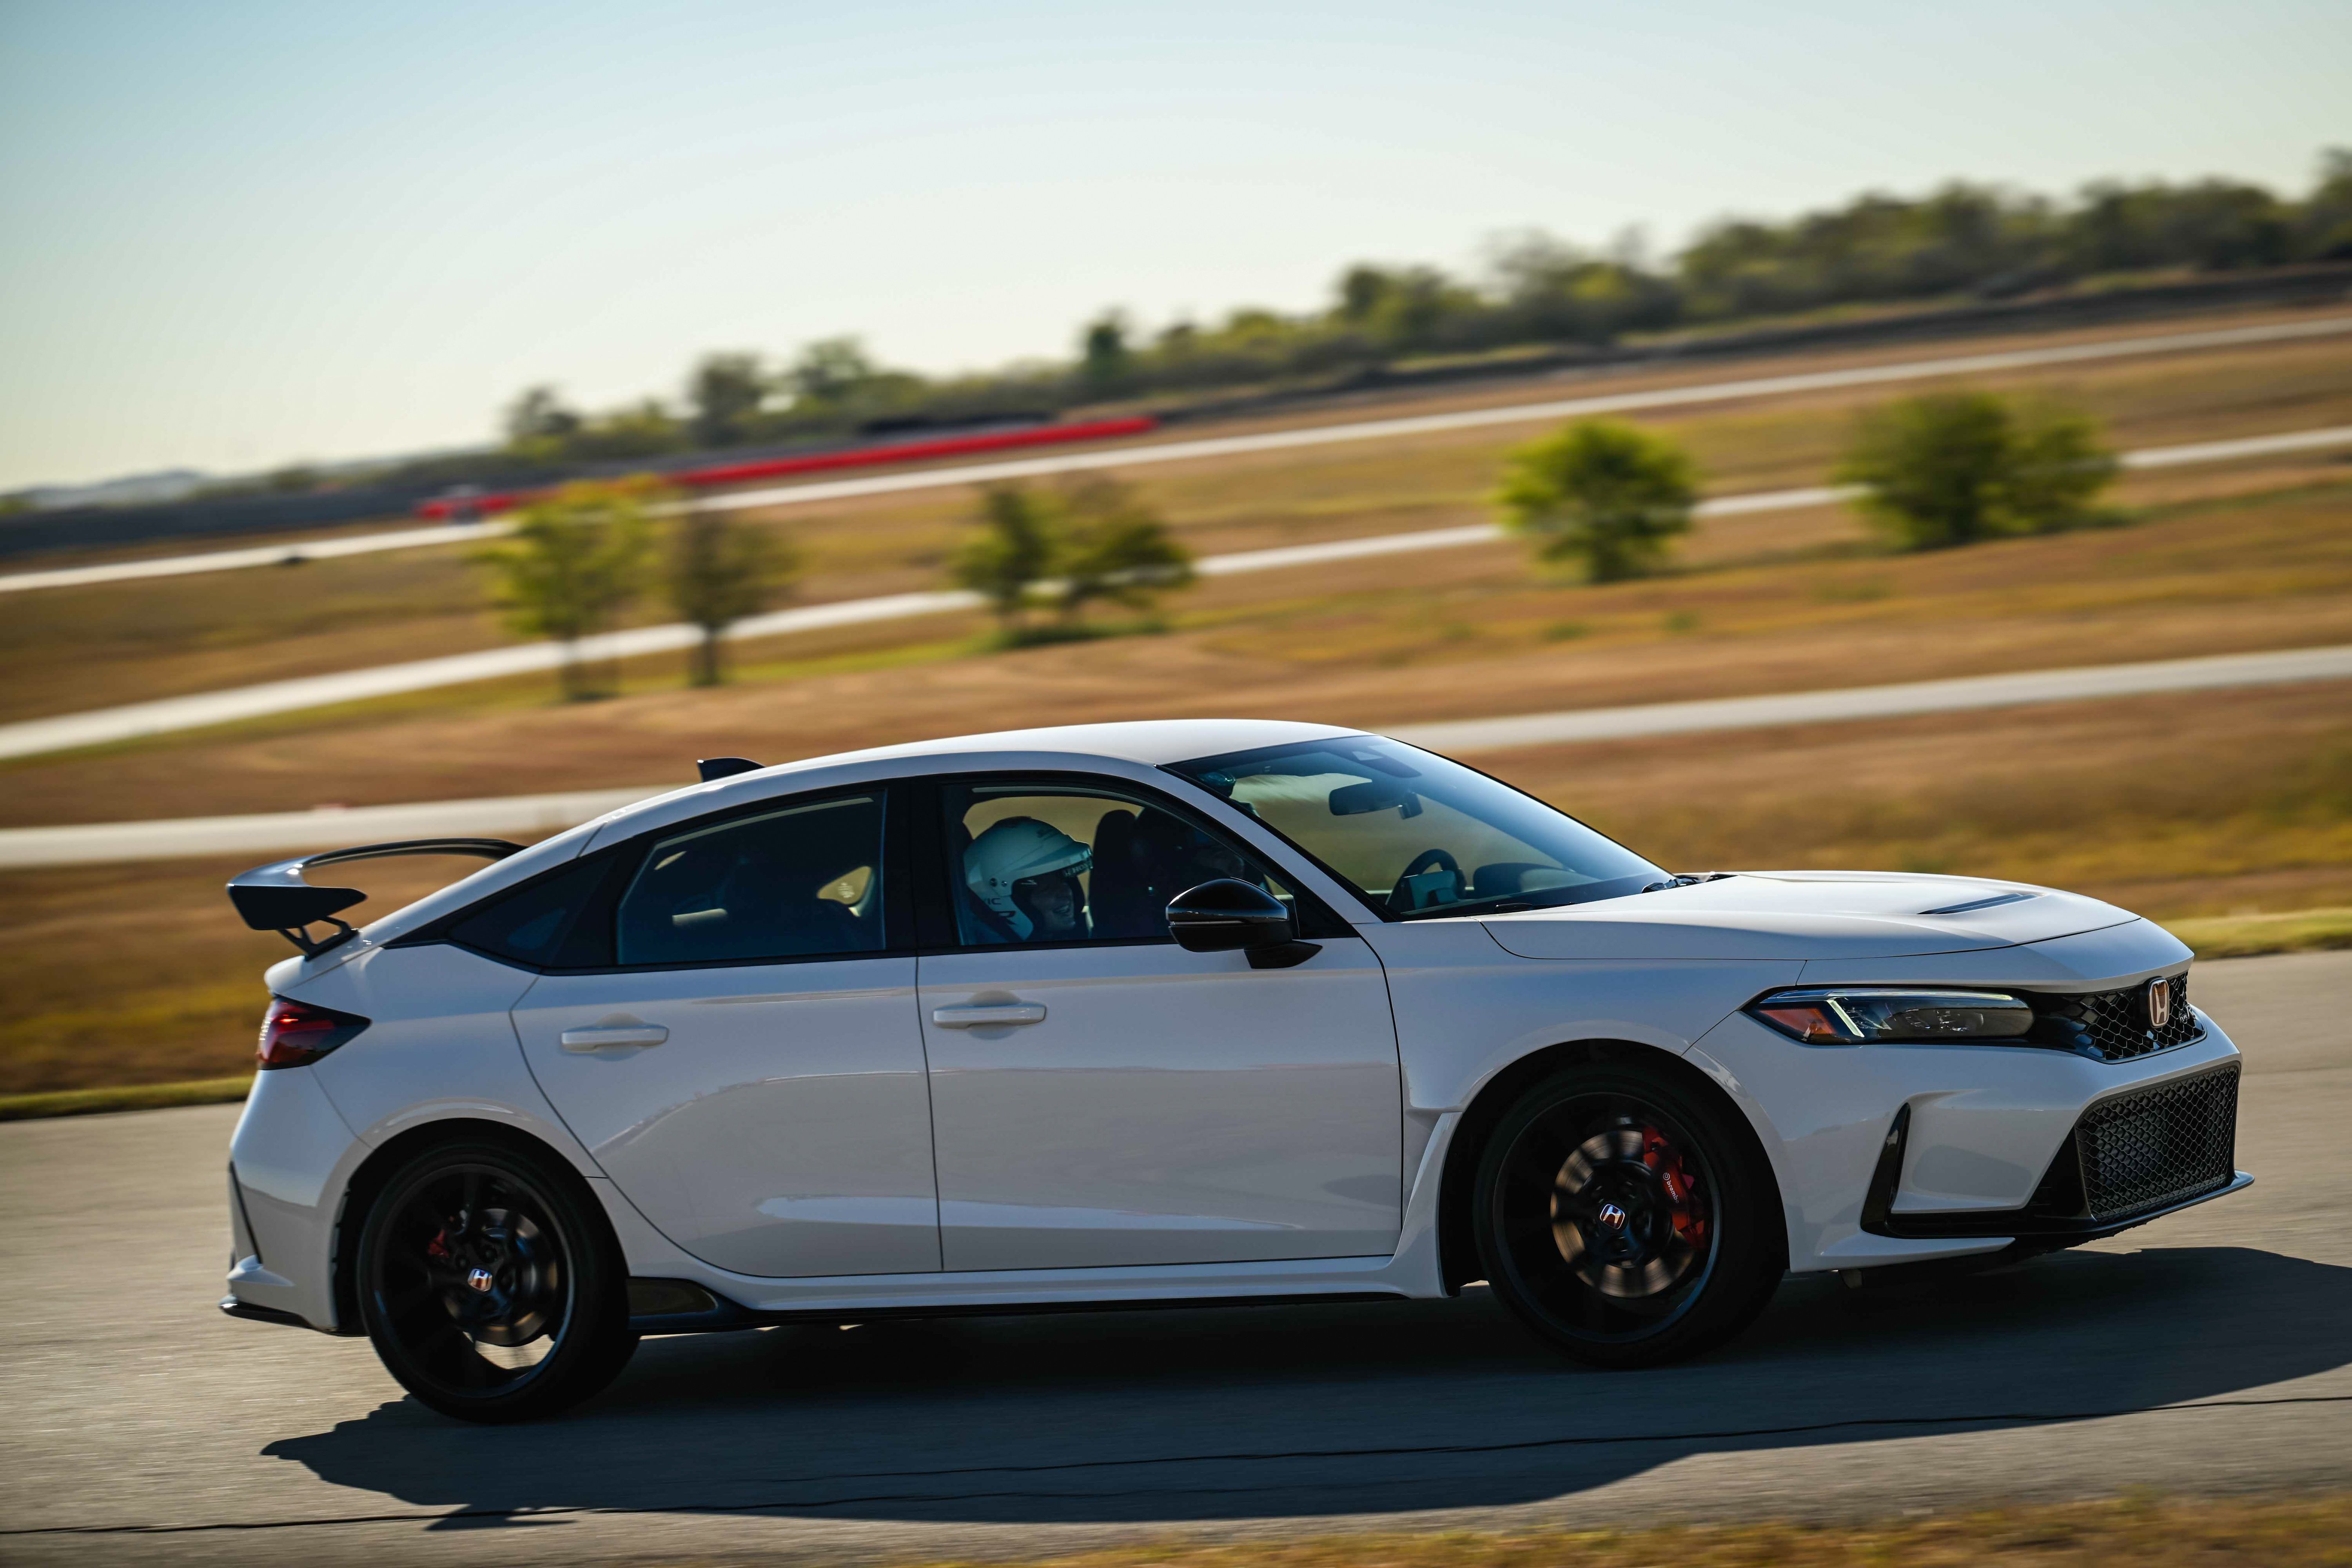 2015 Honda Civic Type R Photos and Info – News – Car and Driver